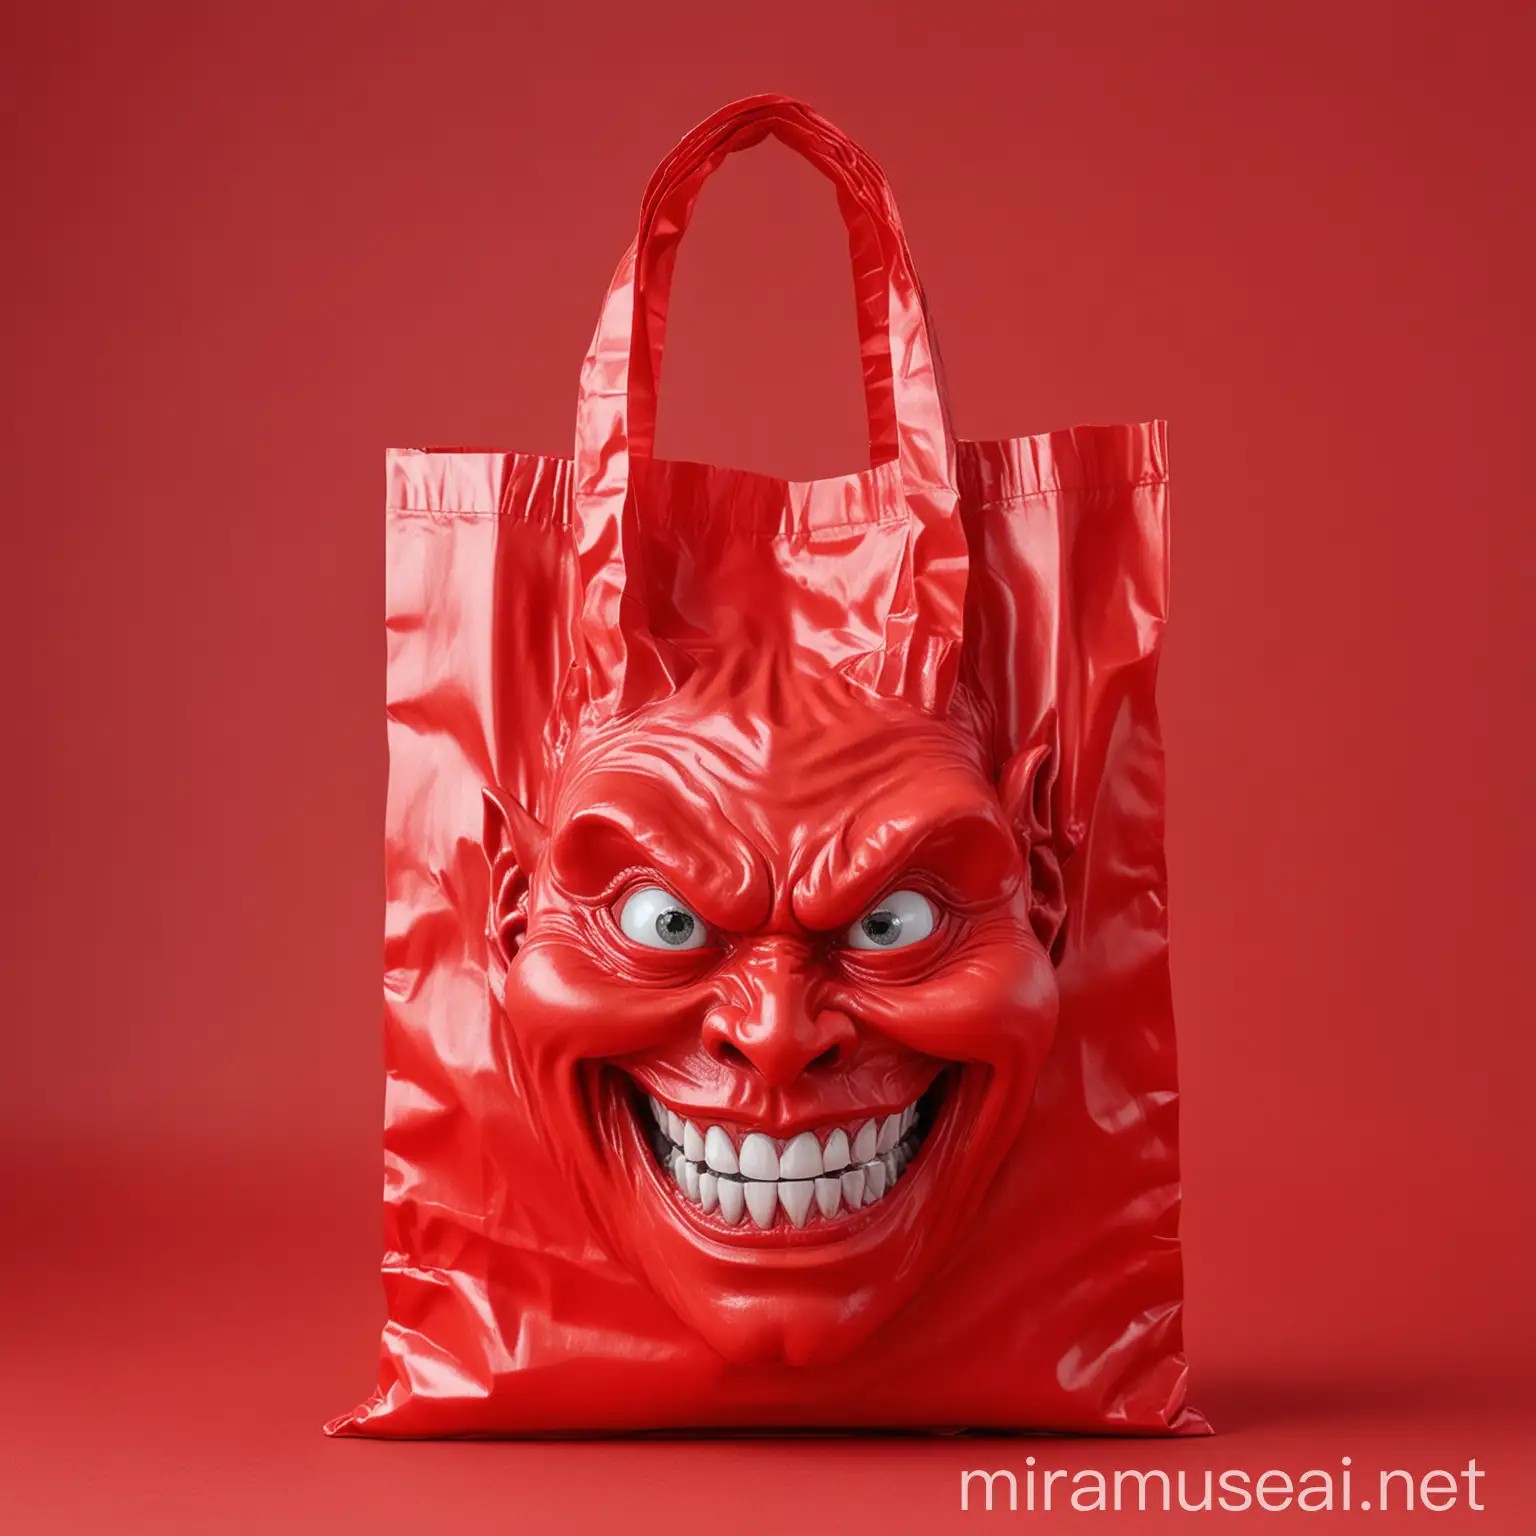 Red Plastic Bag with Smiling Devils Head Print Sinfully Cheerful Shopping Companion